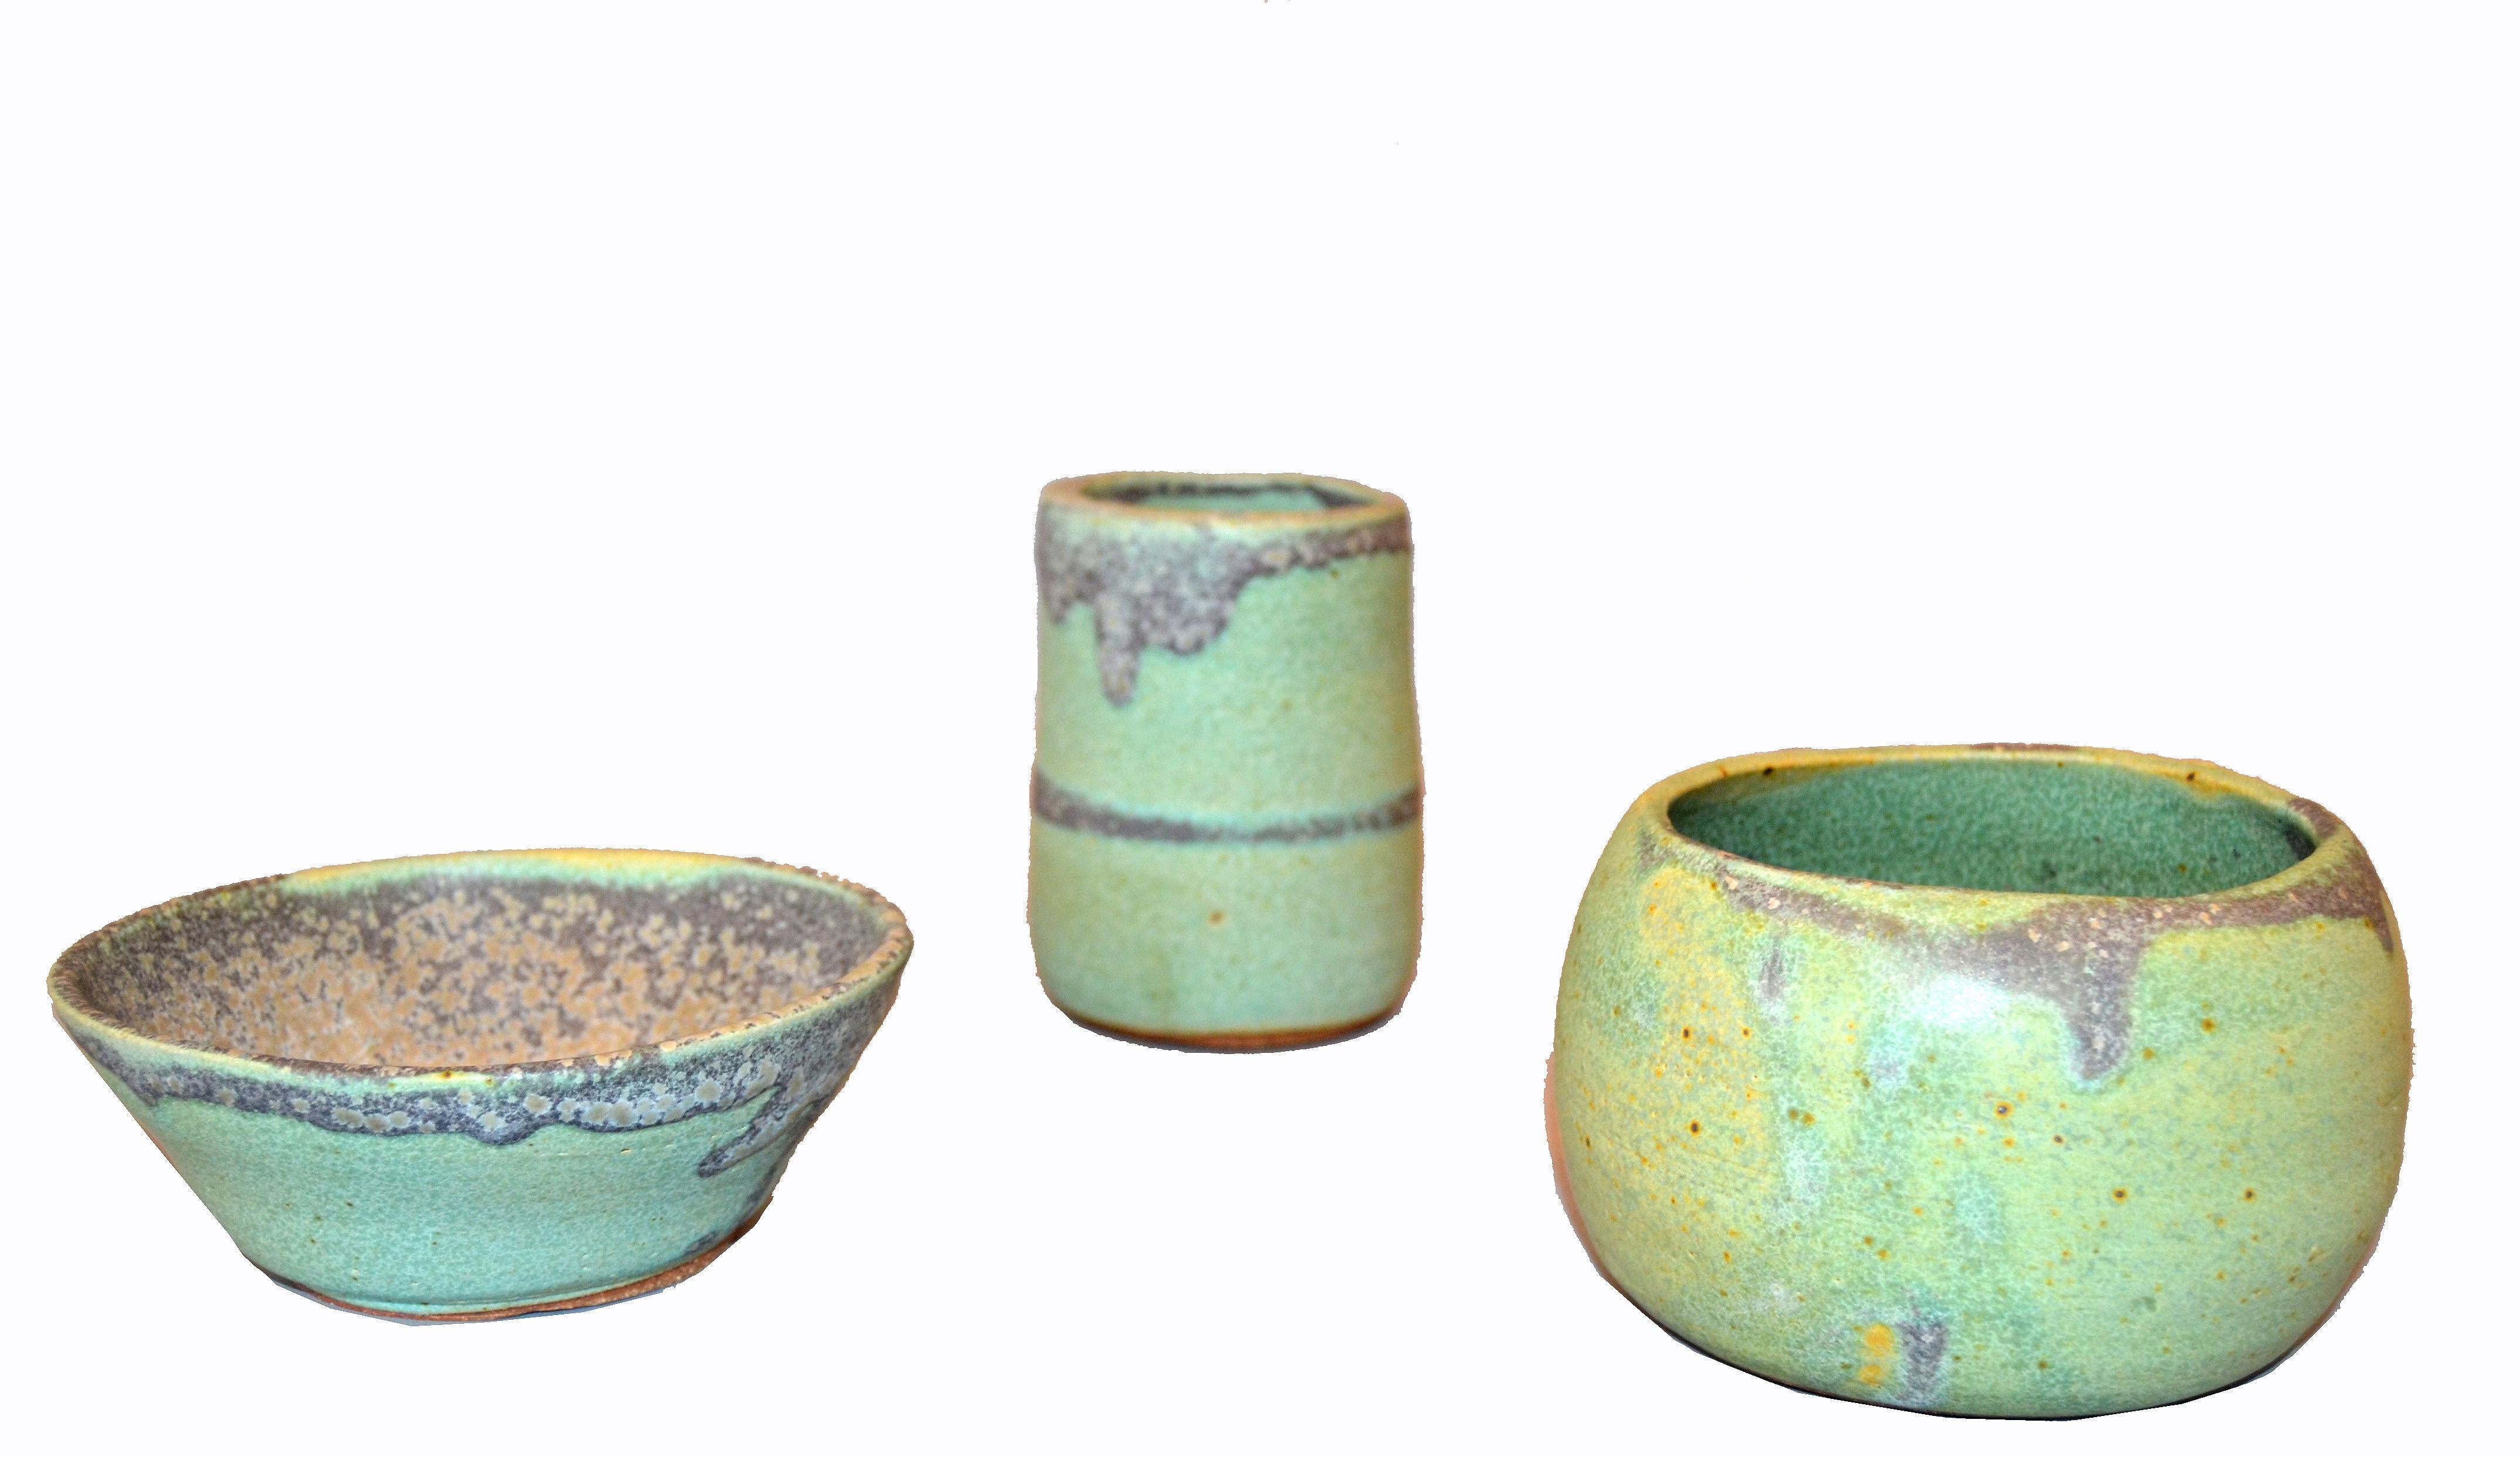 Hand-Crafted Vintage Handcrafted Aztec Green and Gray Pottery Bowls or Vessel Set of 3 For Sale